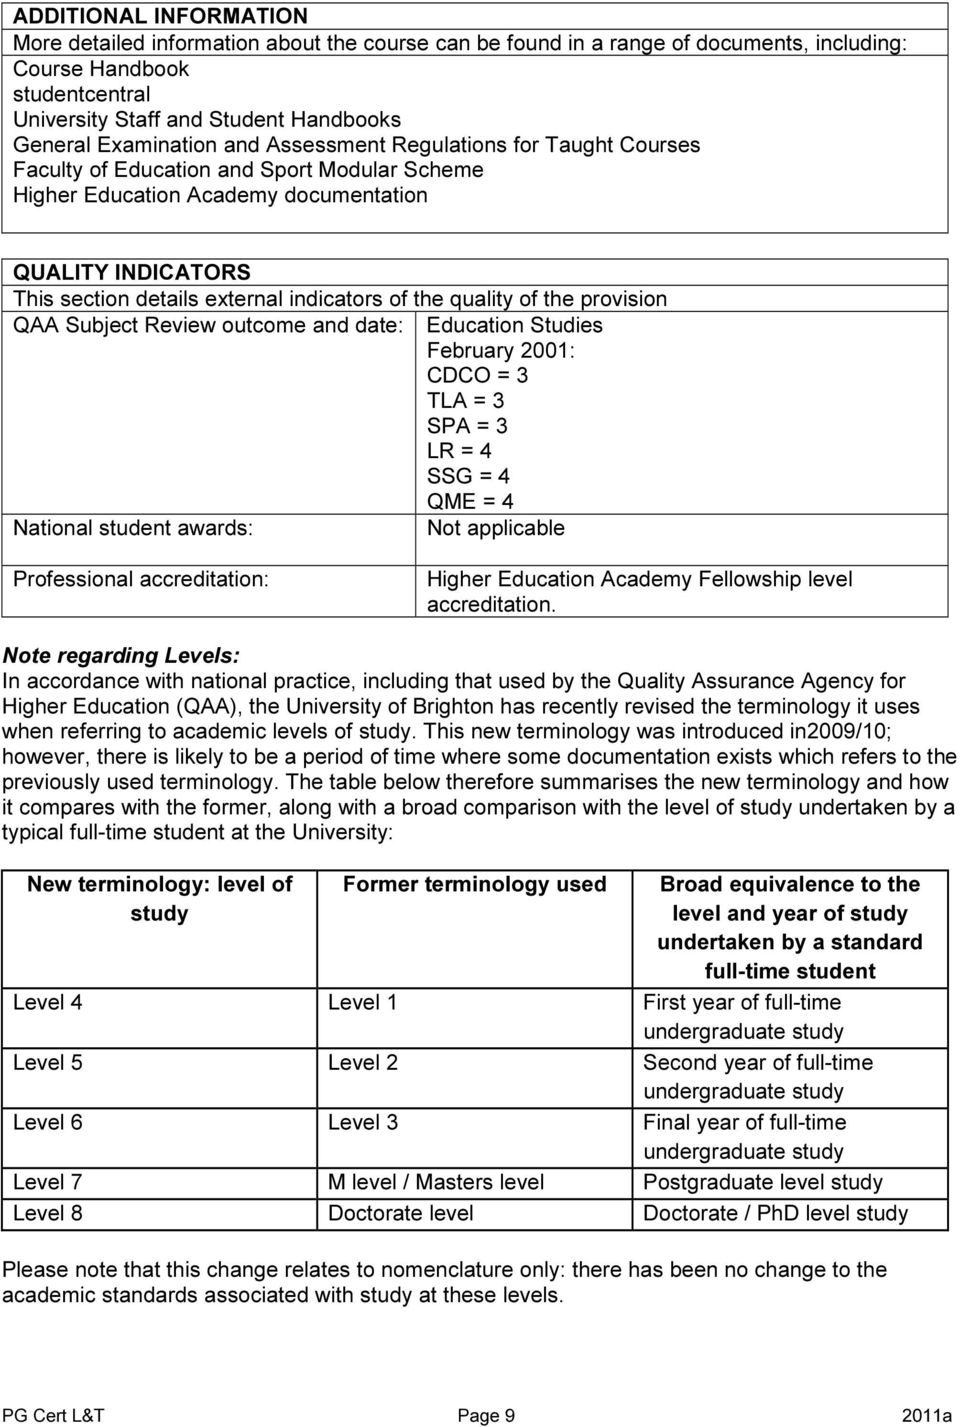 indicators of the quality of the provision QAA Subject Review outcome and date: Education Studies February 2001: CDCO = 3 TLA = 3 SPA = 3 LR = 4 SSG = 4 QME = 4 National student awards: Professional